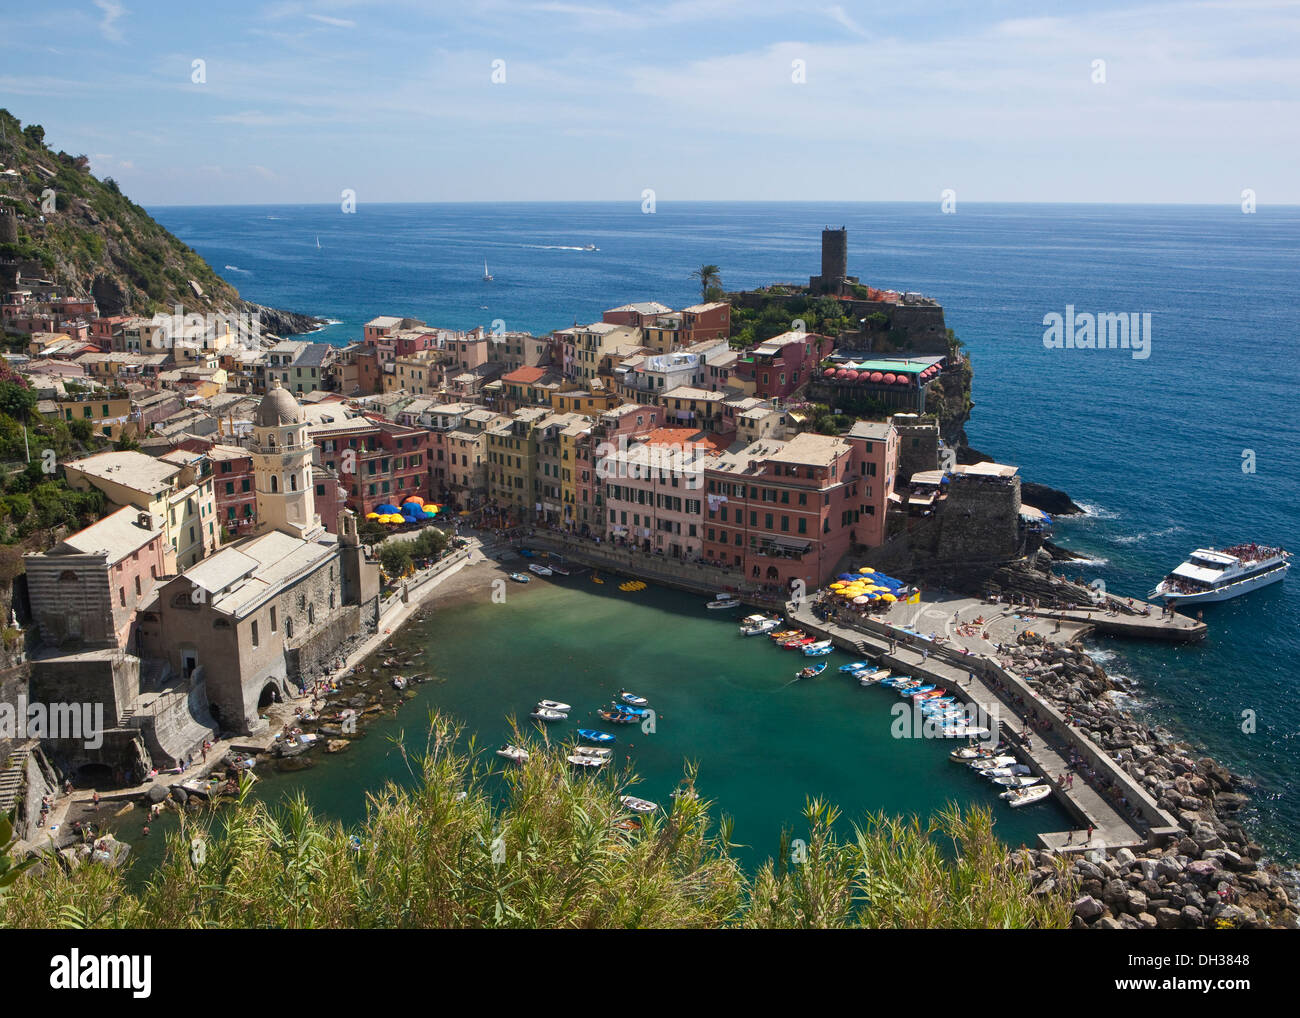 An elevated view of Vernazza Harbour in the Cinque Terre region of Italy Stock Photo